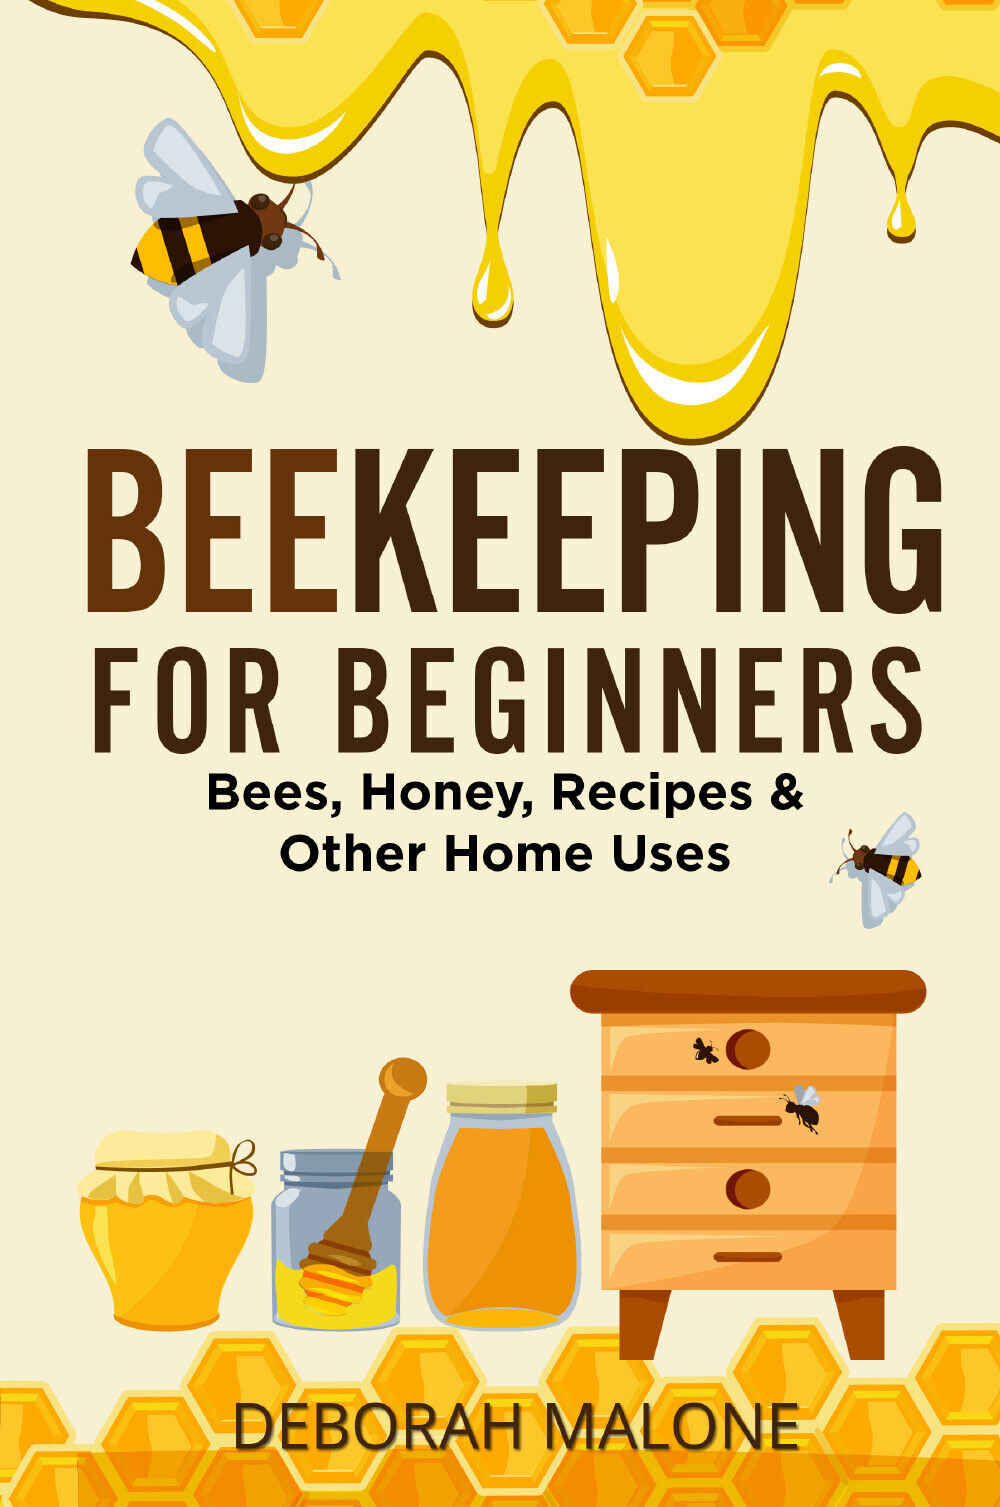 Beekeeping for Beginners. Bees, Honey, Recipes & Other Home Uses di Deborah Malo libro usato